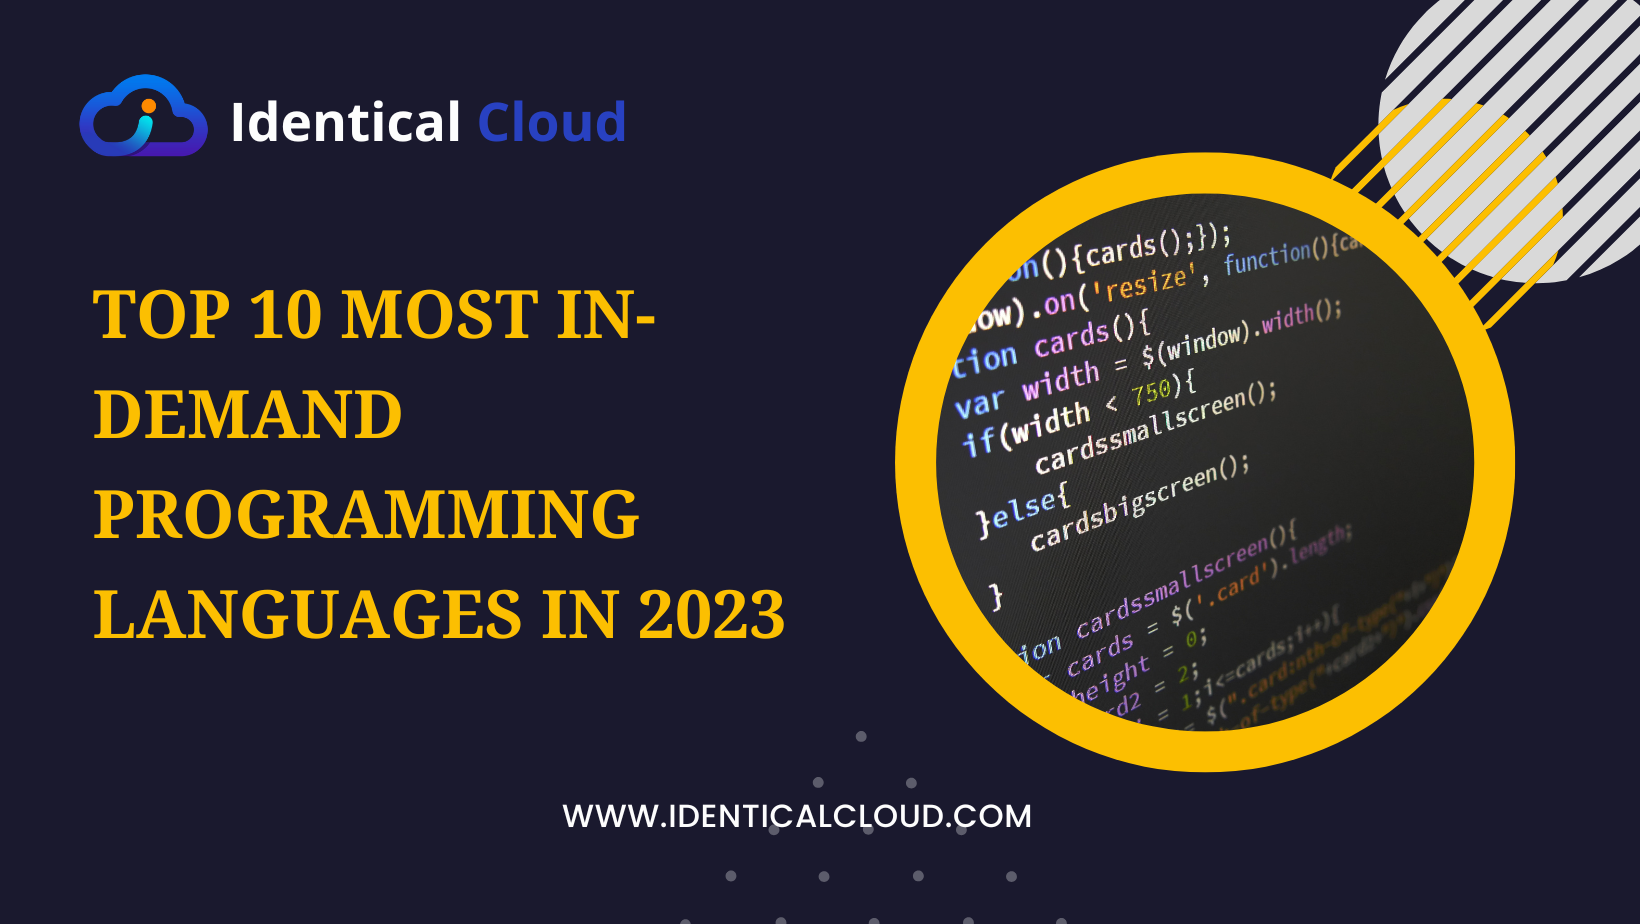 Top 10 Most In-Demand Programming Languages in 2023 - identicalcloud.com